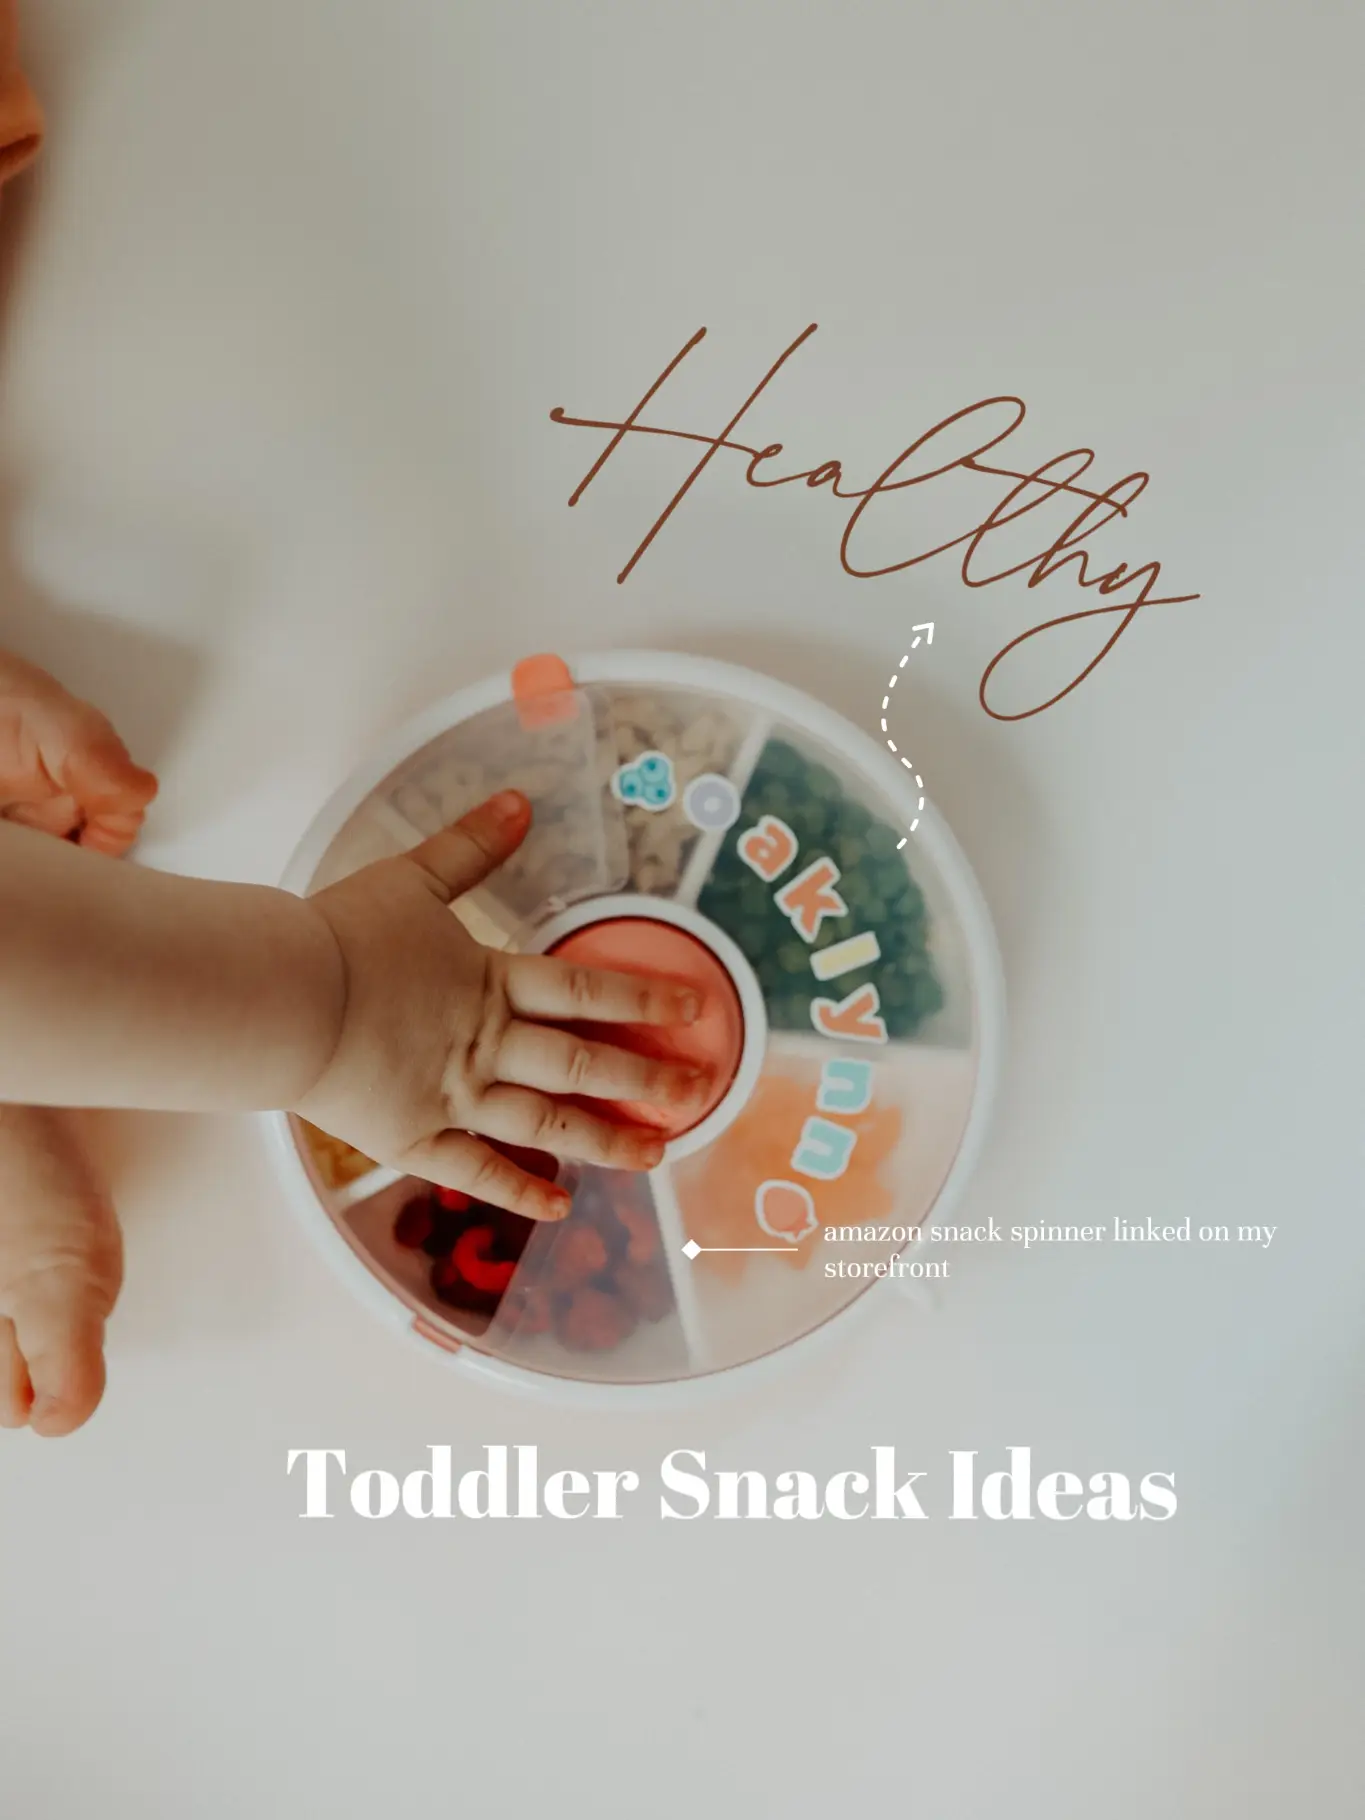 HEALTHY TODDLER SNACKS🍓, Gallery posted by Kylie Altvatter